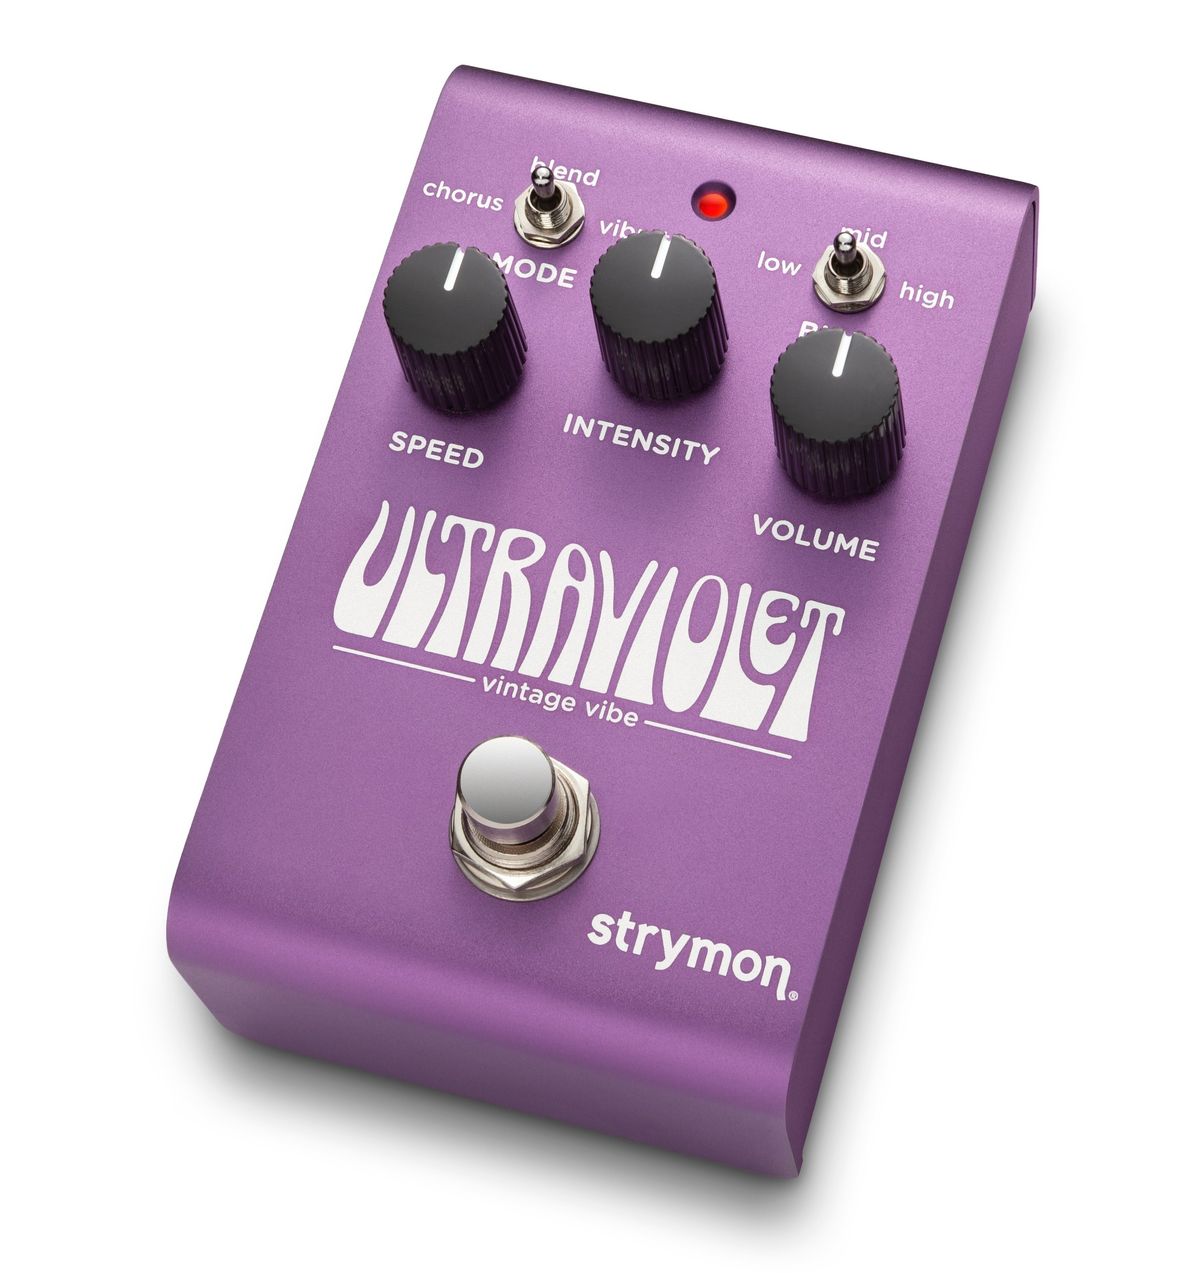 Strymon Releases the UltraViolet Vintage Vibe